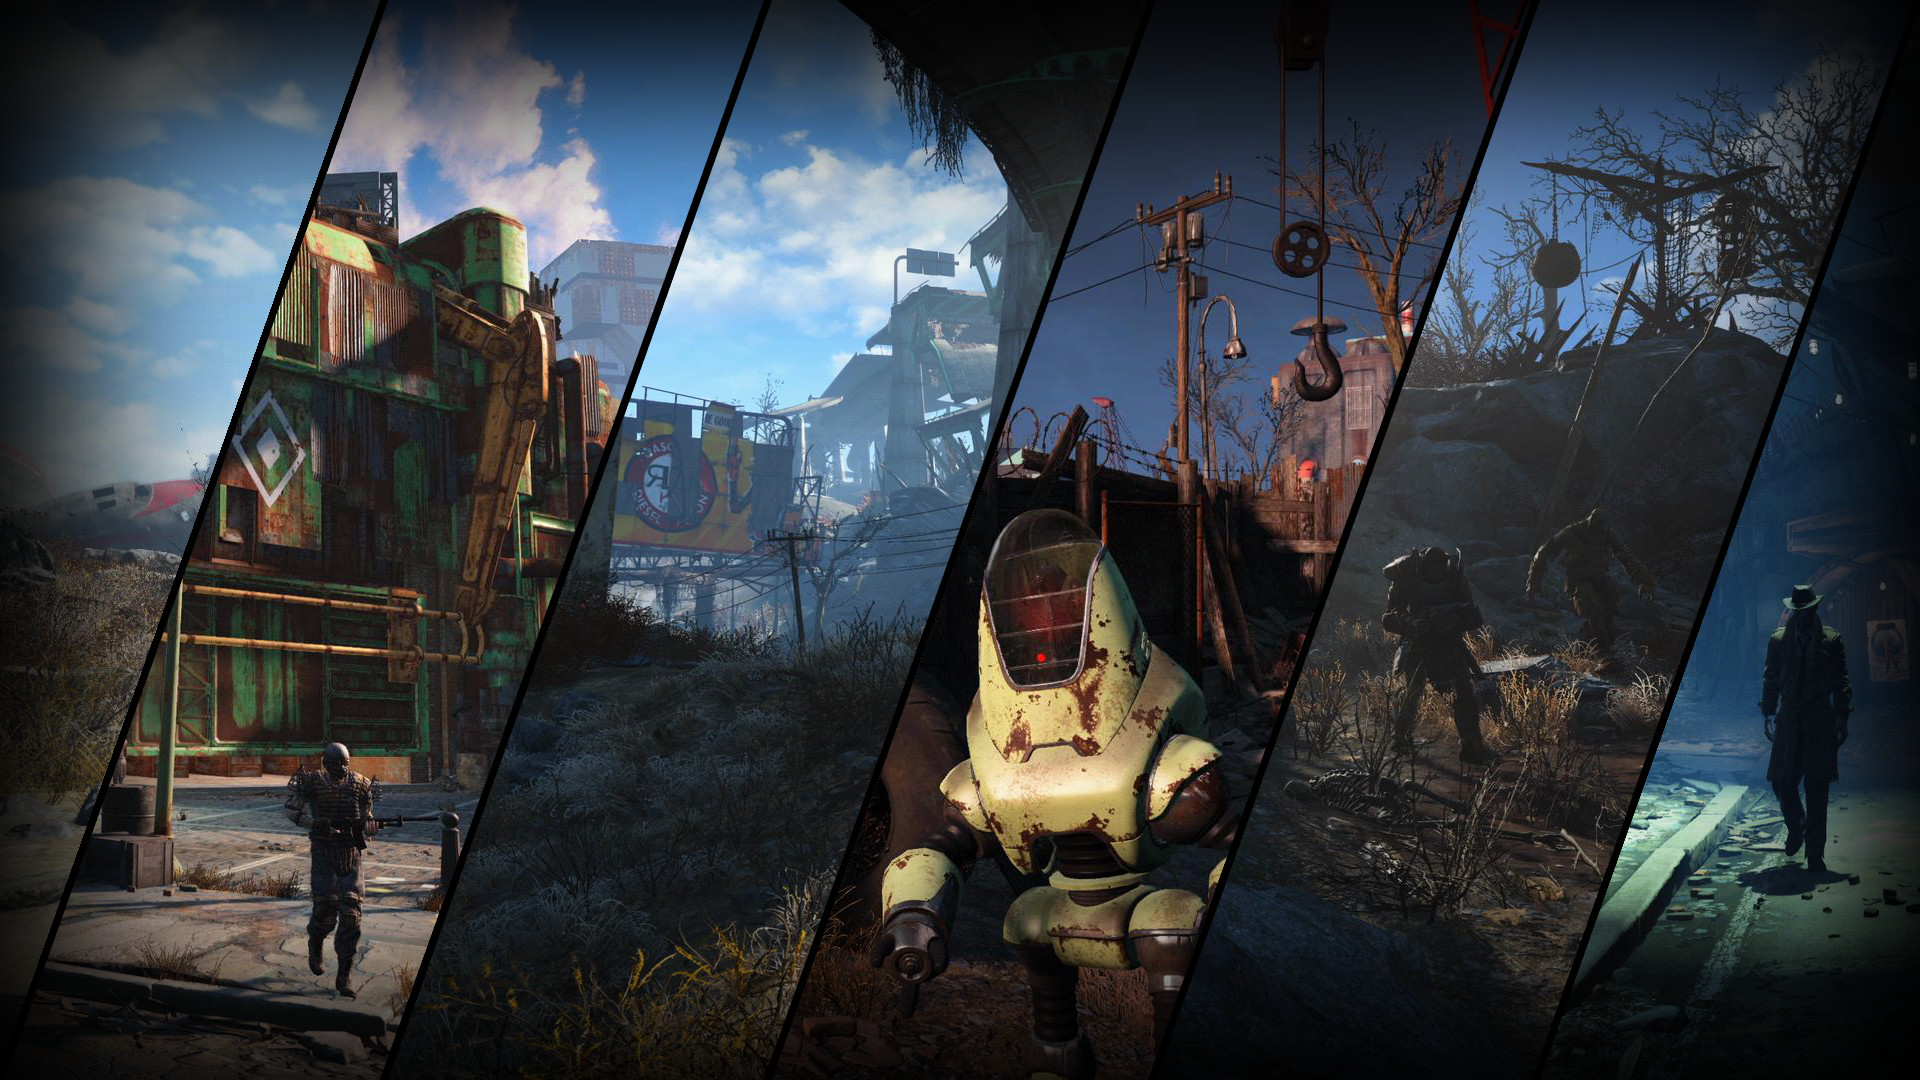 1920x1080 Peasantry FreeI made a Fallout 4 wallpaper! Hope you guys like it.